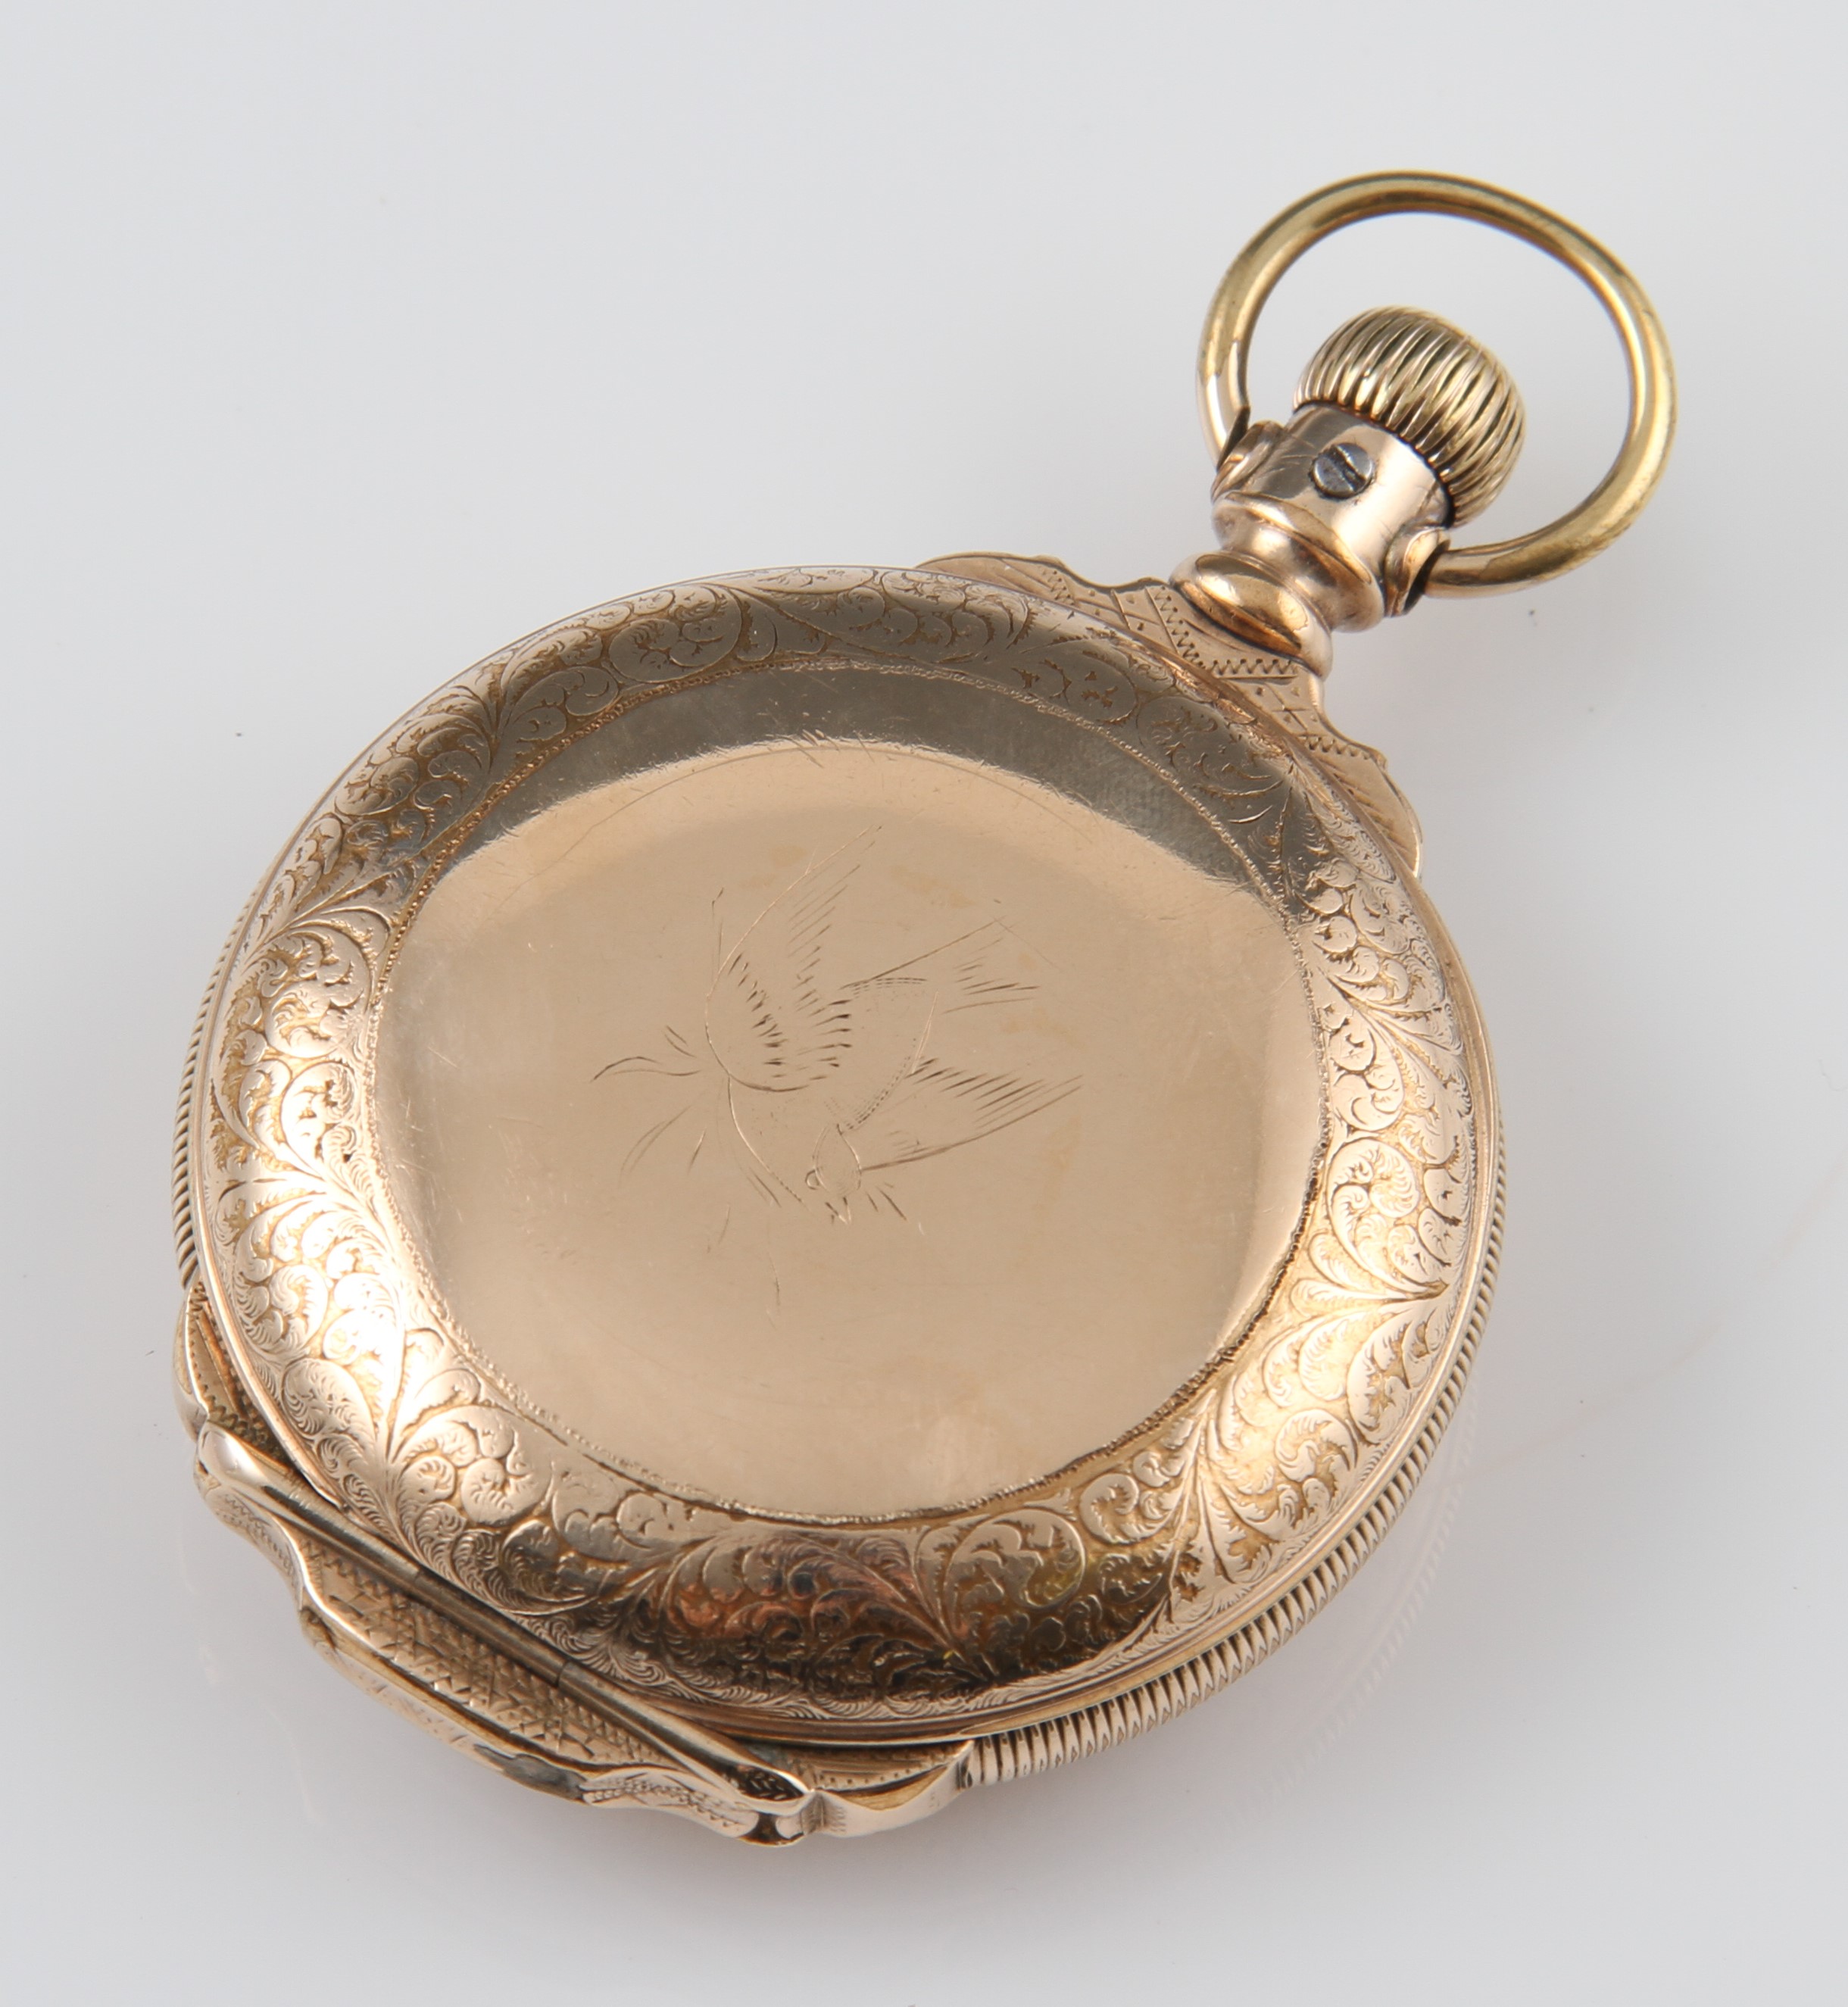 A plated P. S. Bartlett Waltham Watch Co. full hunter crown wind pocket watch, the white enamel dial - Image 3 of 3